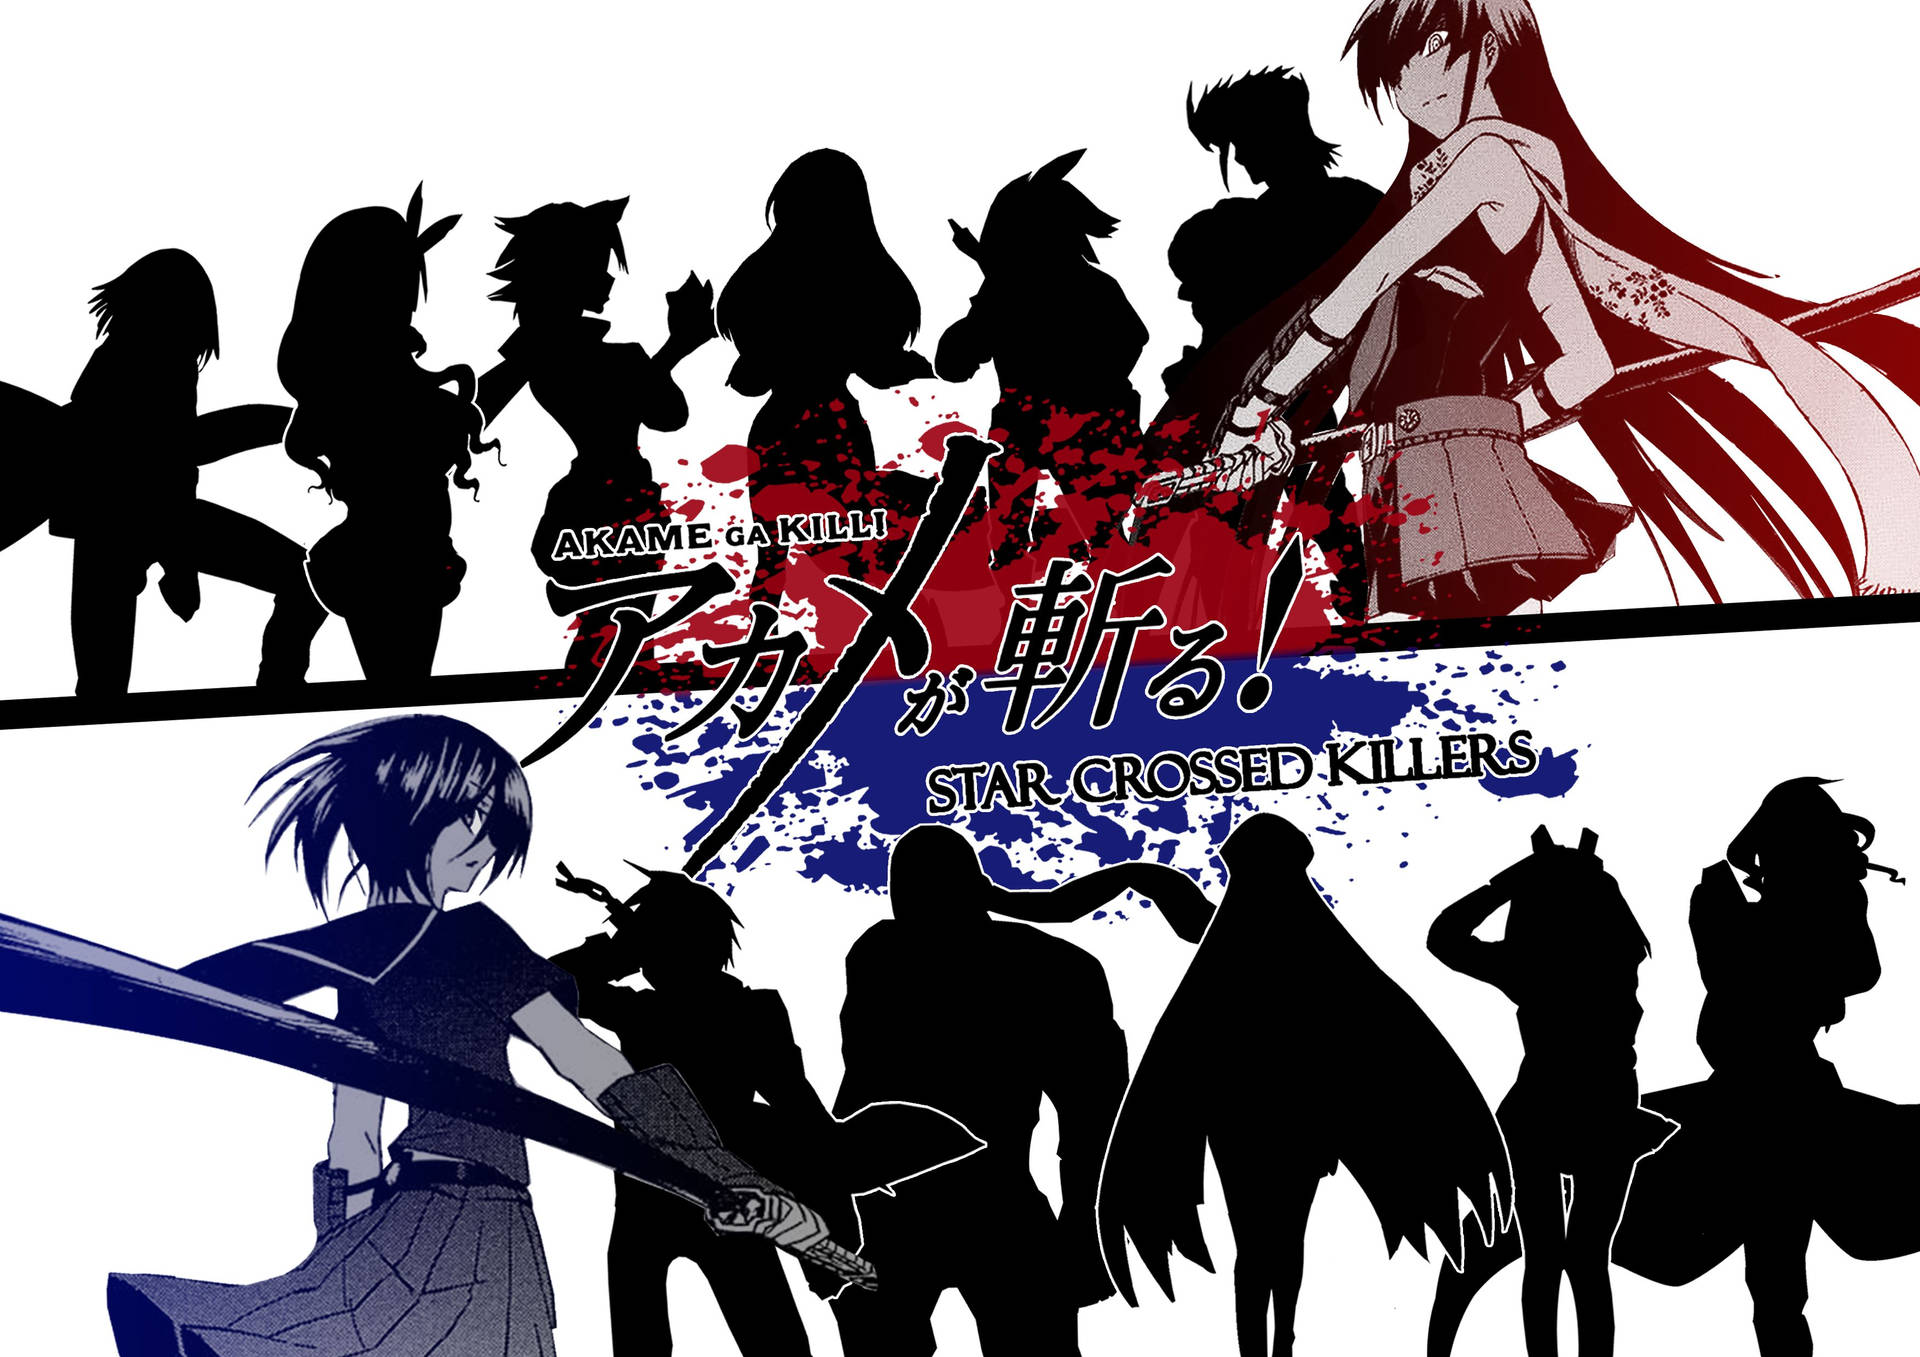 Follow Akame and her allies on their daring mission to overthrow the corrupt Empire Wallpaper